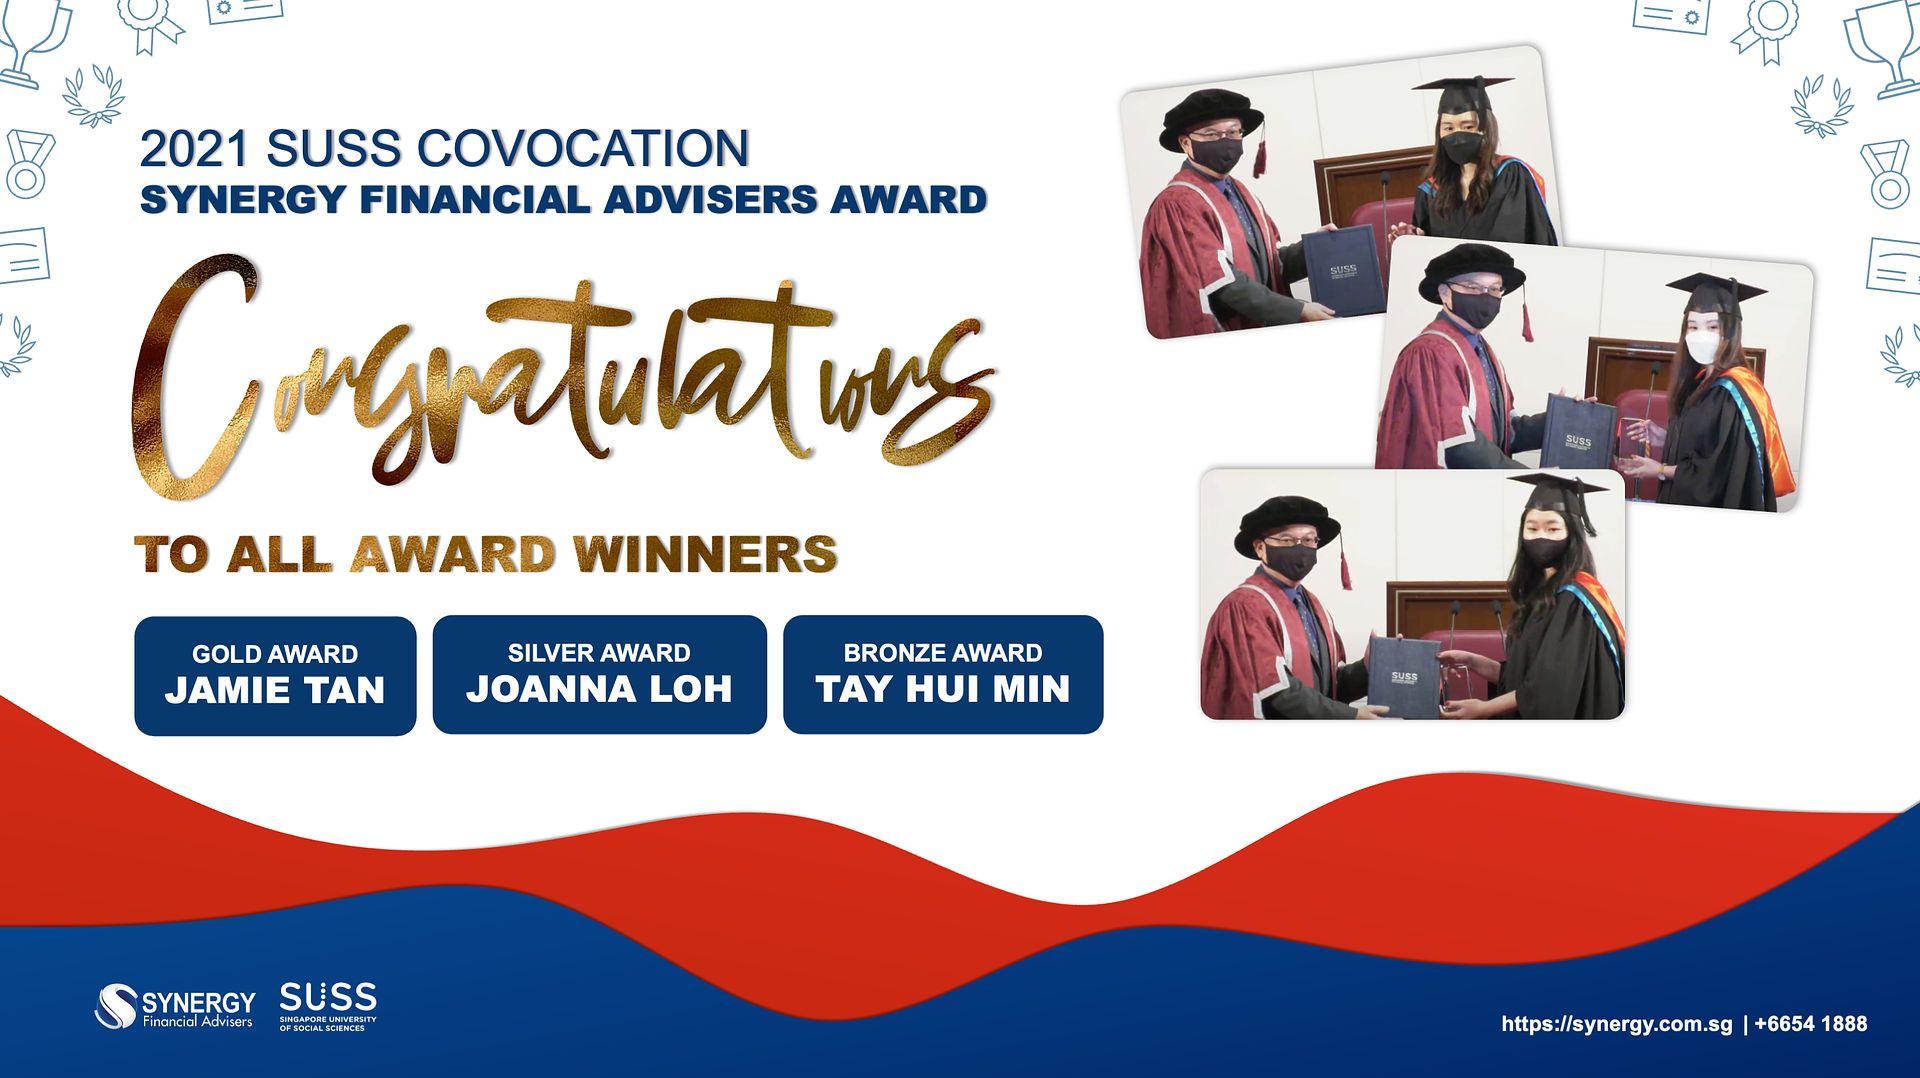 2021 SUSS x Synergy Financial Advisers’ Convocation Award Winners